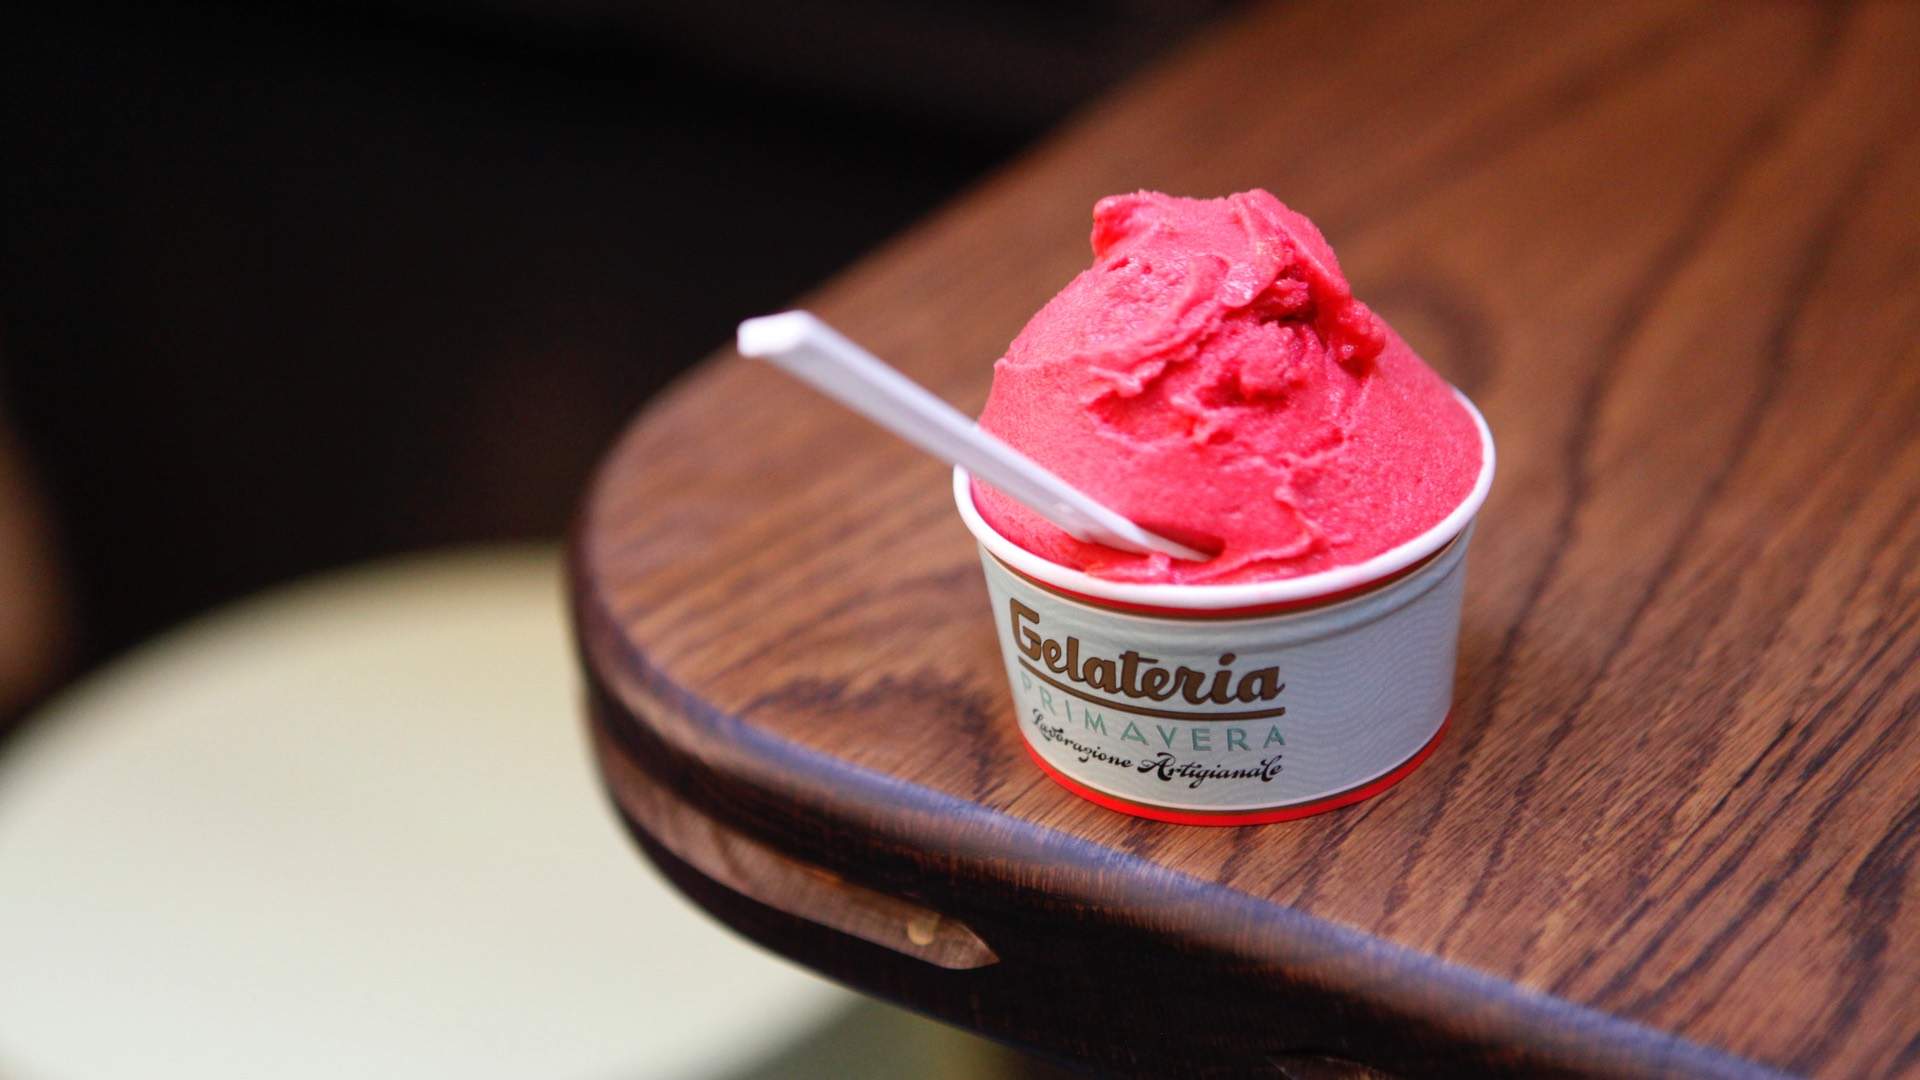 GELATERIA PRIMAVERA - home to some of the best gelato in Melbourne - and the best ice cream in Melbourne.